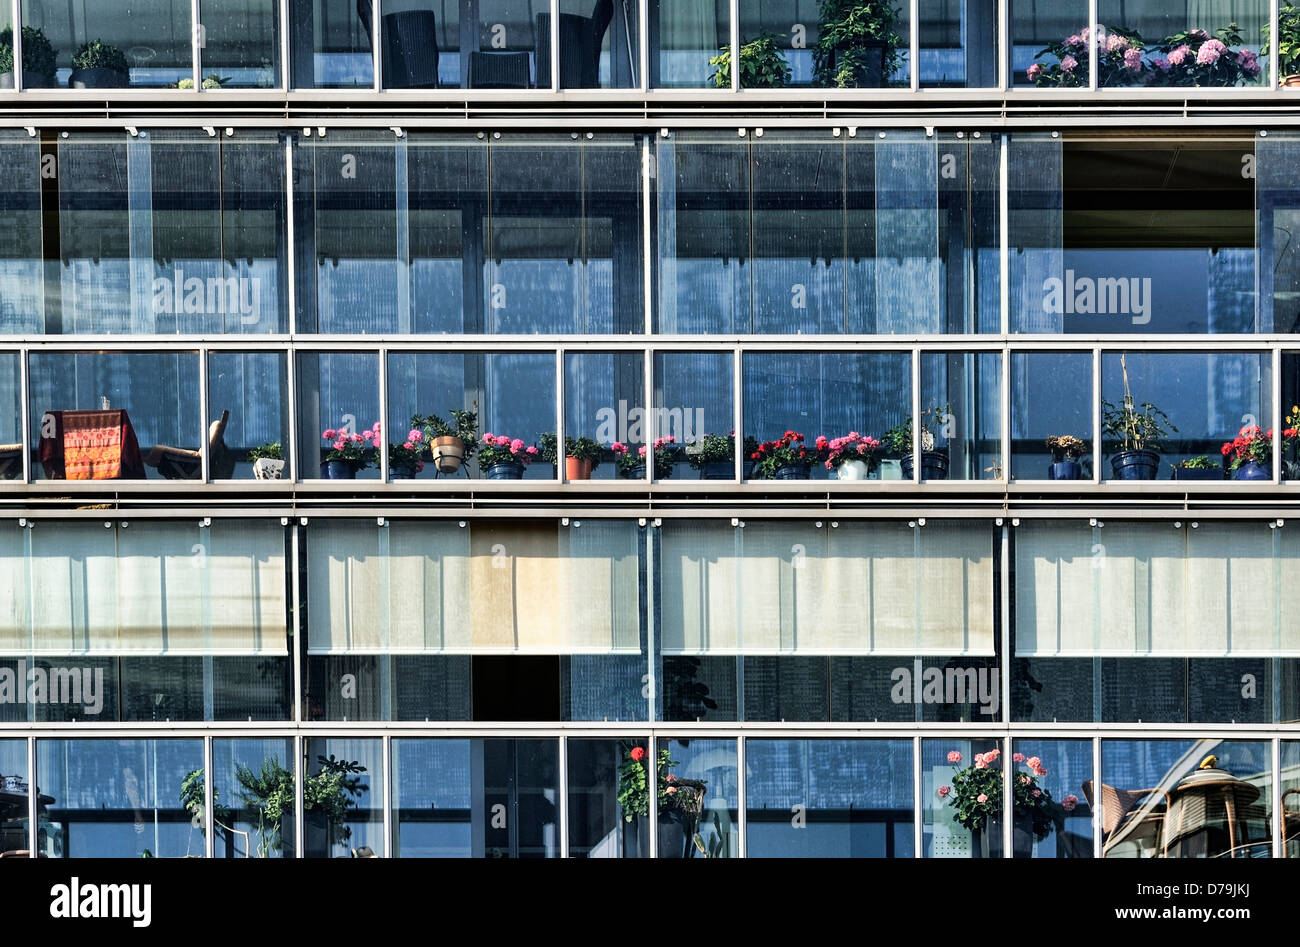 Glas Facade High Resolution Stock Photography and Images - Alamy